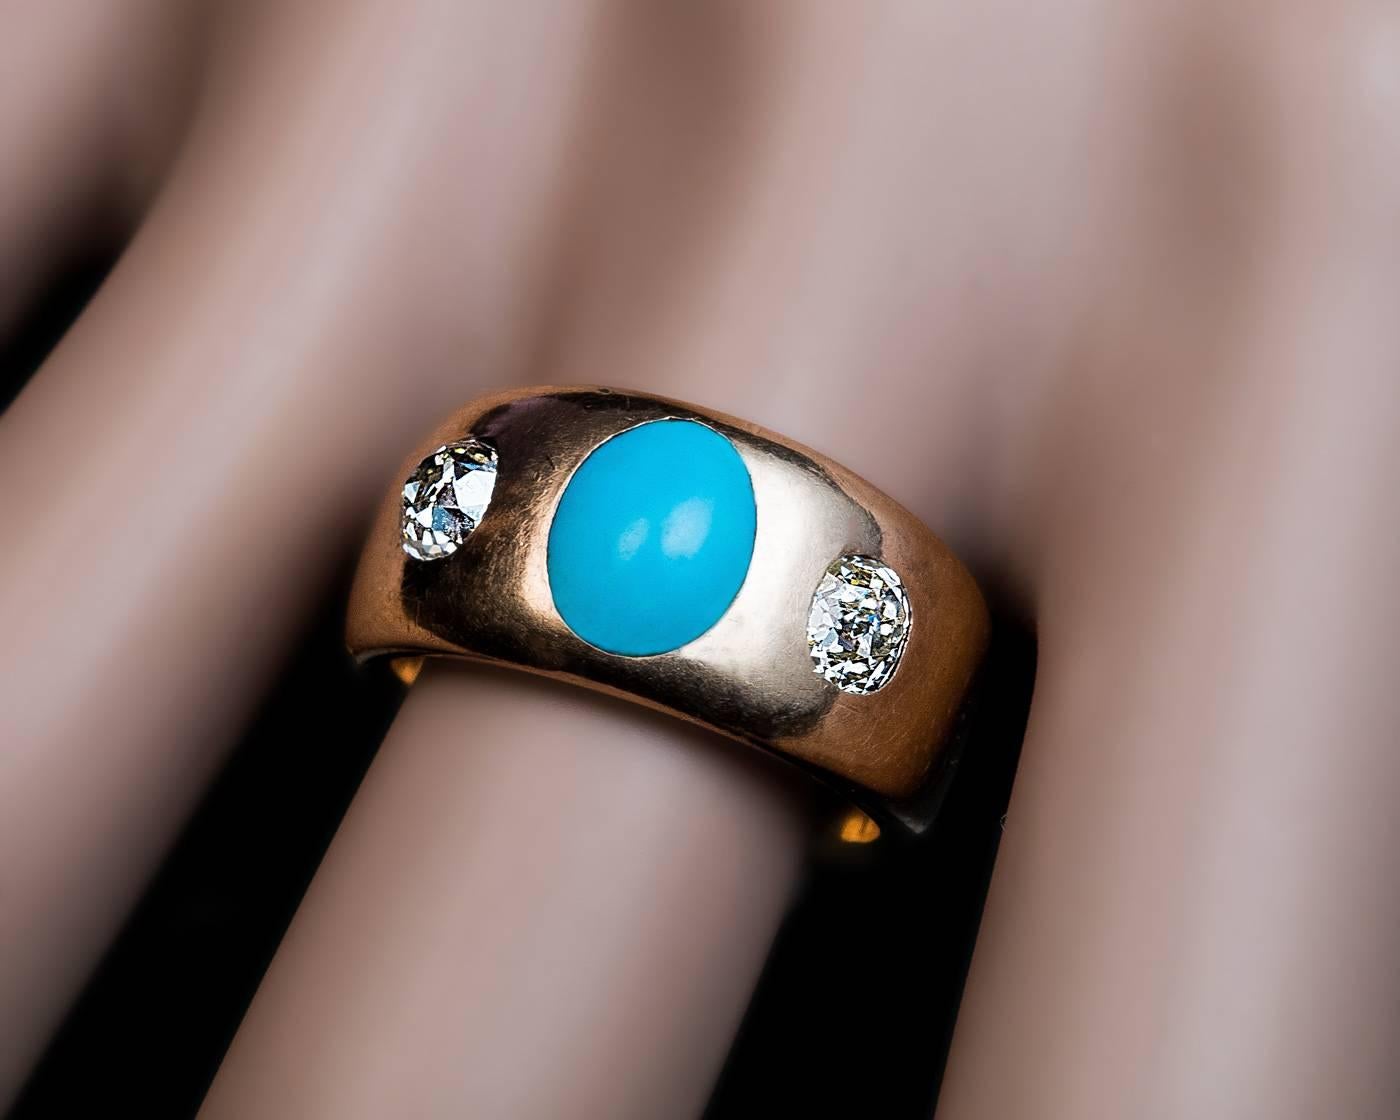 Russian, made in St. Petersburg between 1882 and 1898

An antique Victorian era 14K gold Gypsy ring is centered with a cabochon Persian turquoise flanked by two sparkling old cushion cut diamonds:

4.4 x 4 x 3 mm, approximately 0.45 ct.

4.5 x